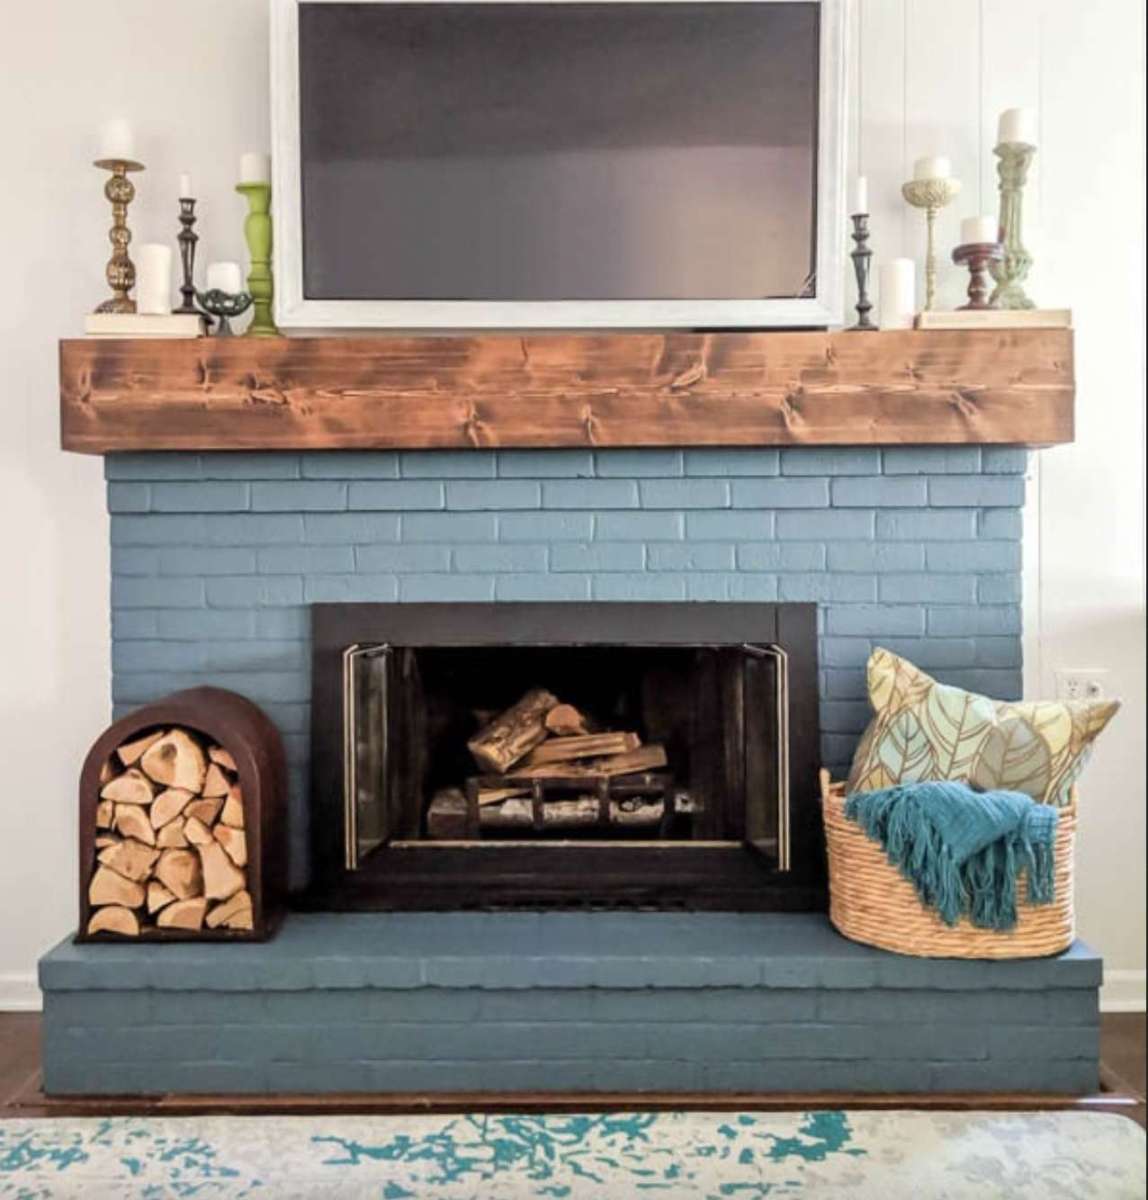 Painted Brick Fireplace Ideas for a Fresh Look